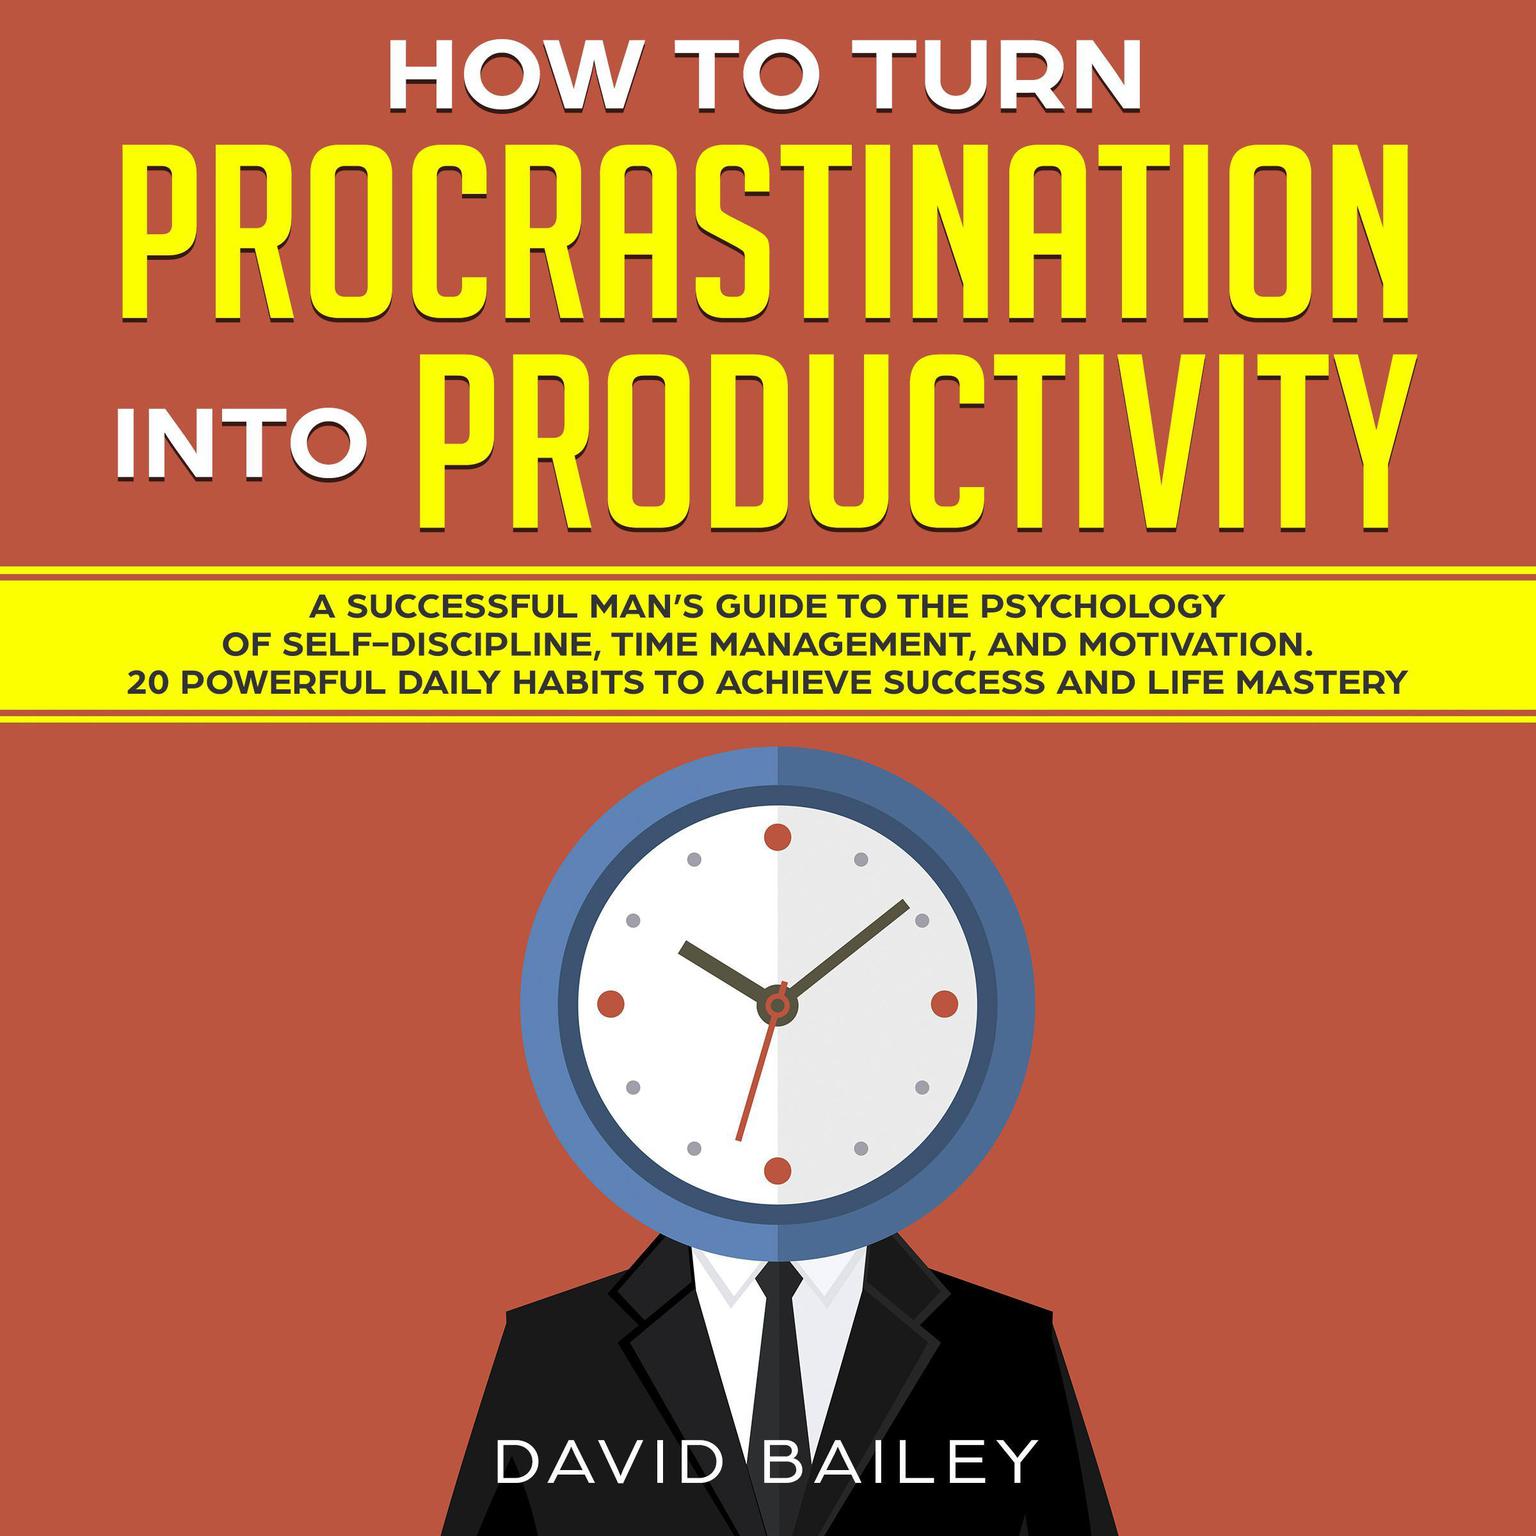 How to Turn Procrastination into Productivity: A Successful Man’s Guide to the Psychology of Self-Discipline, Time Management, and Motivation + 20 Powerful Daily Habits to Achieve Success and Mastery Audiobook, by David Bailey